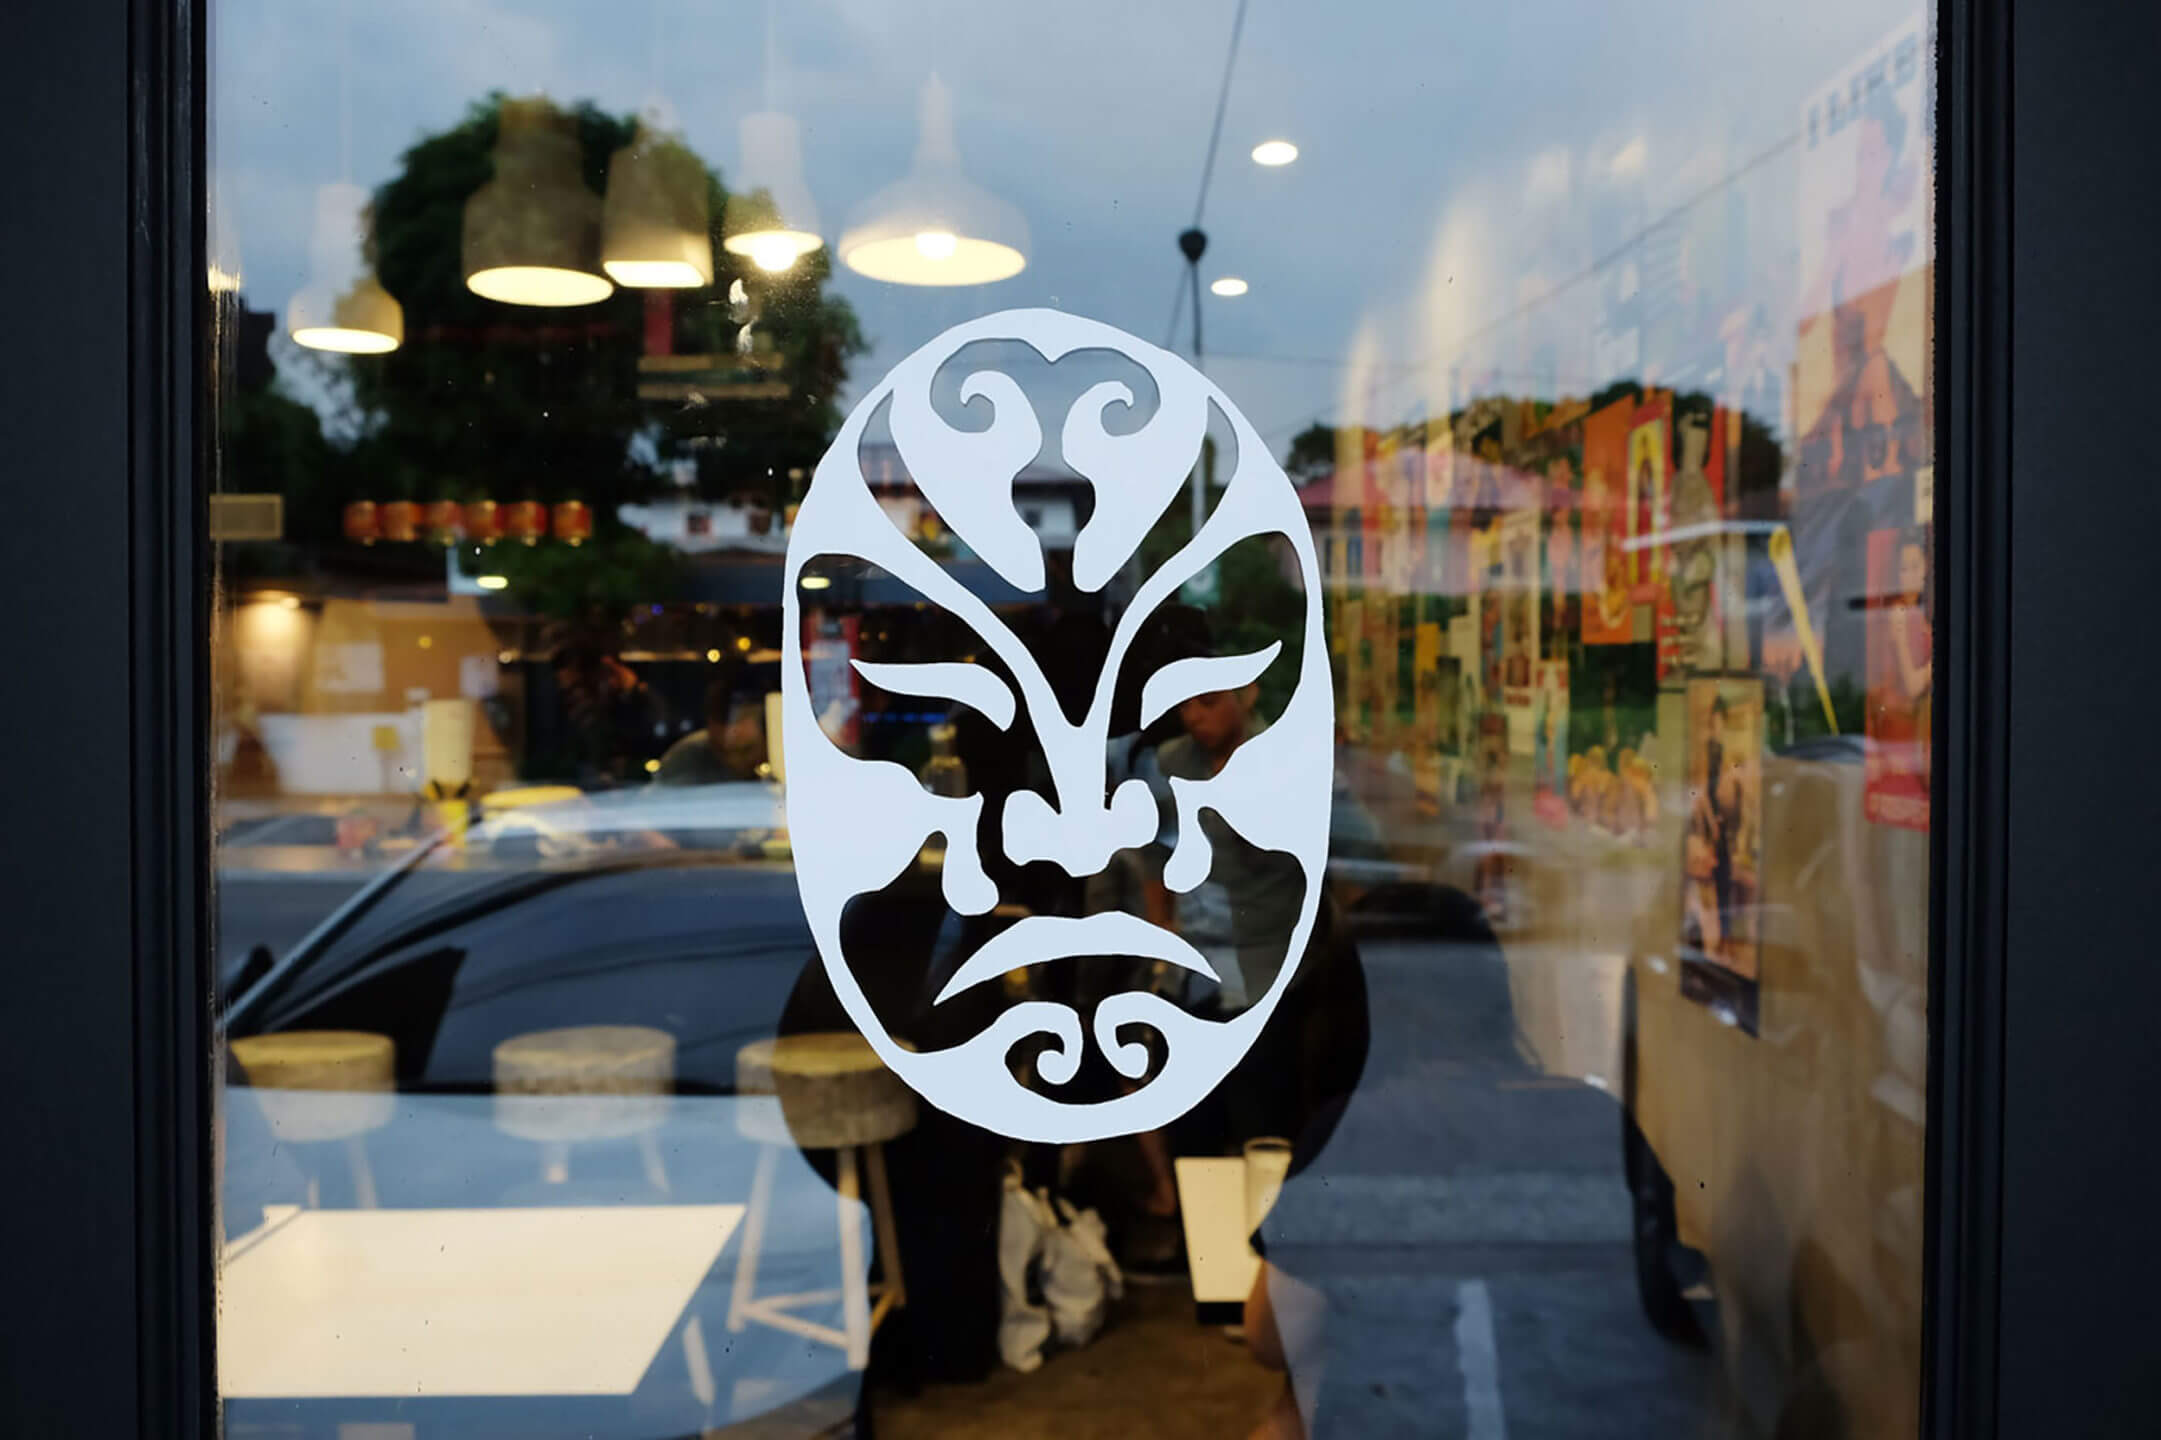 Restaurant decal of a luchador mask on a window designed for Mexican food and beverage brand La Chinesca